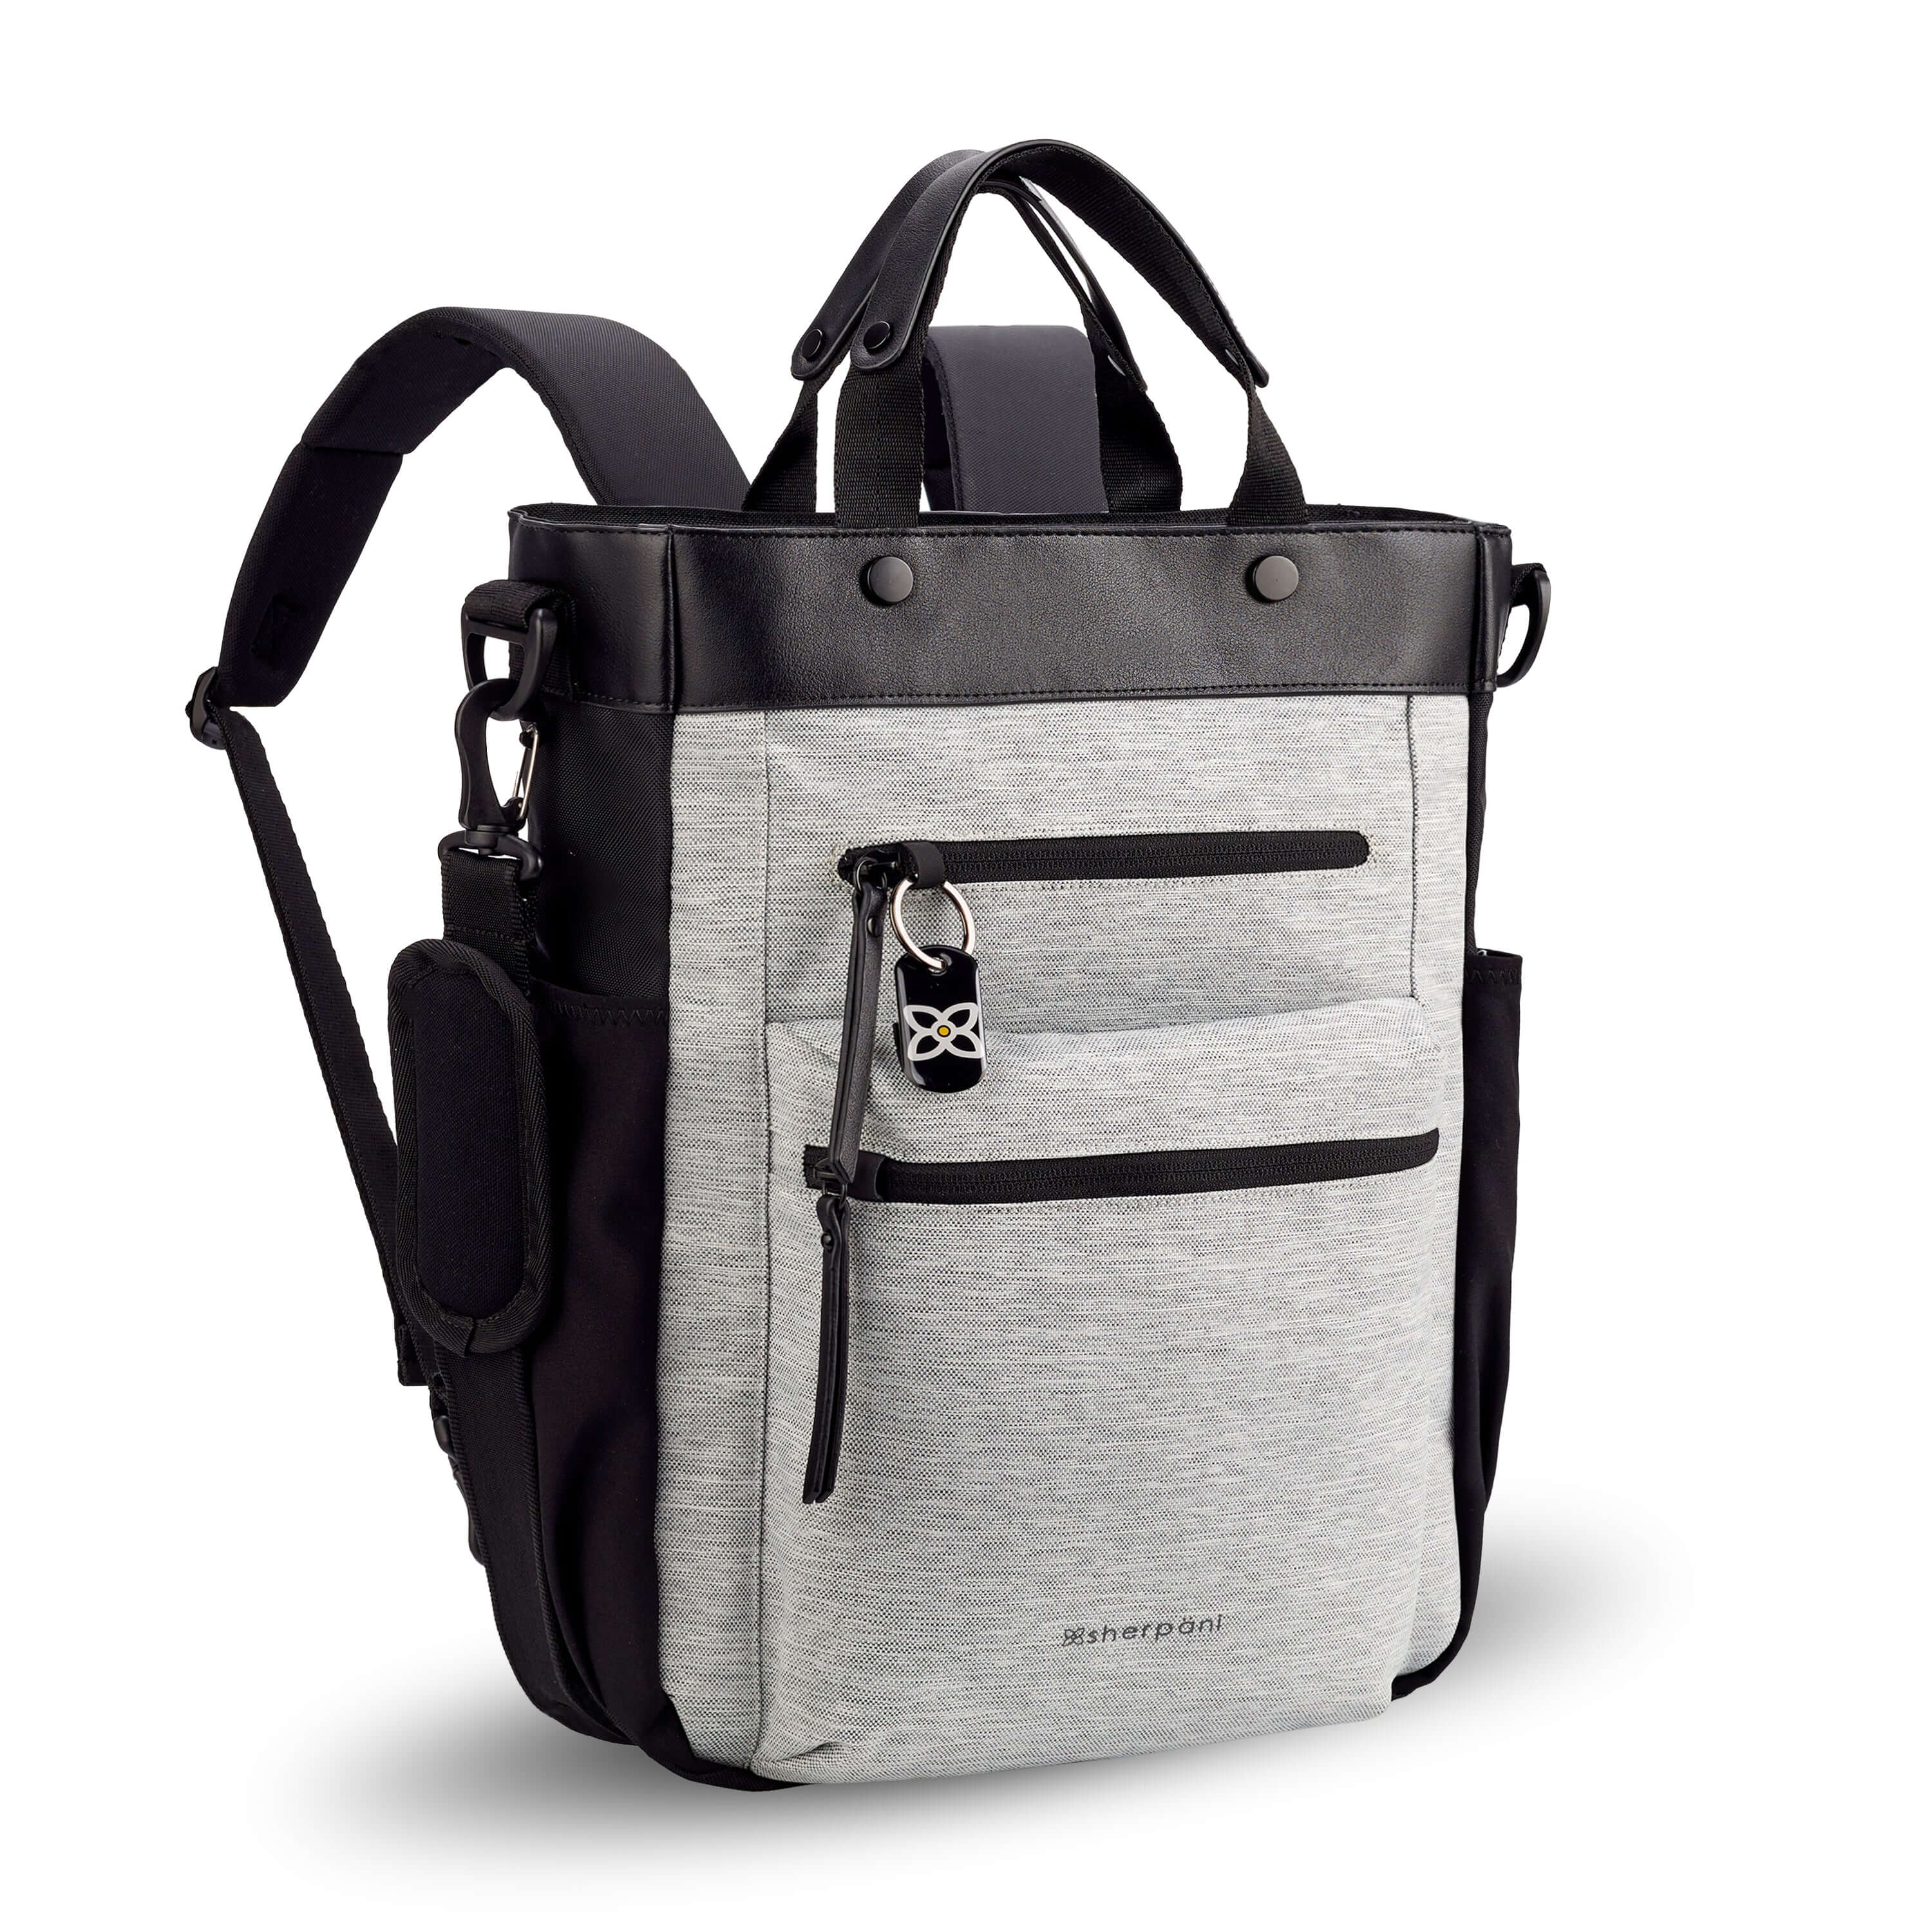 Cream Black Vegan Leather and Knit Material Backpack